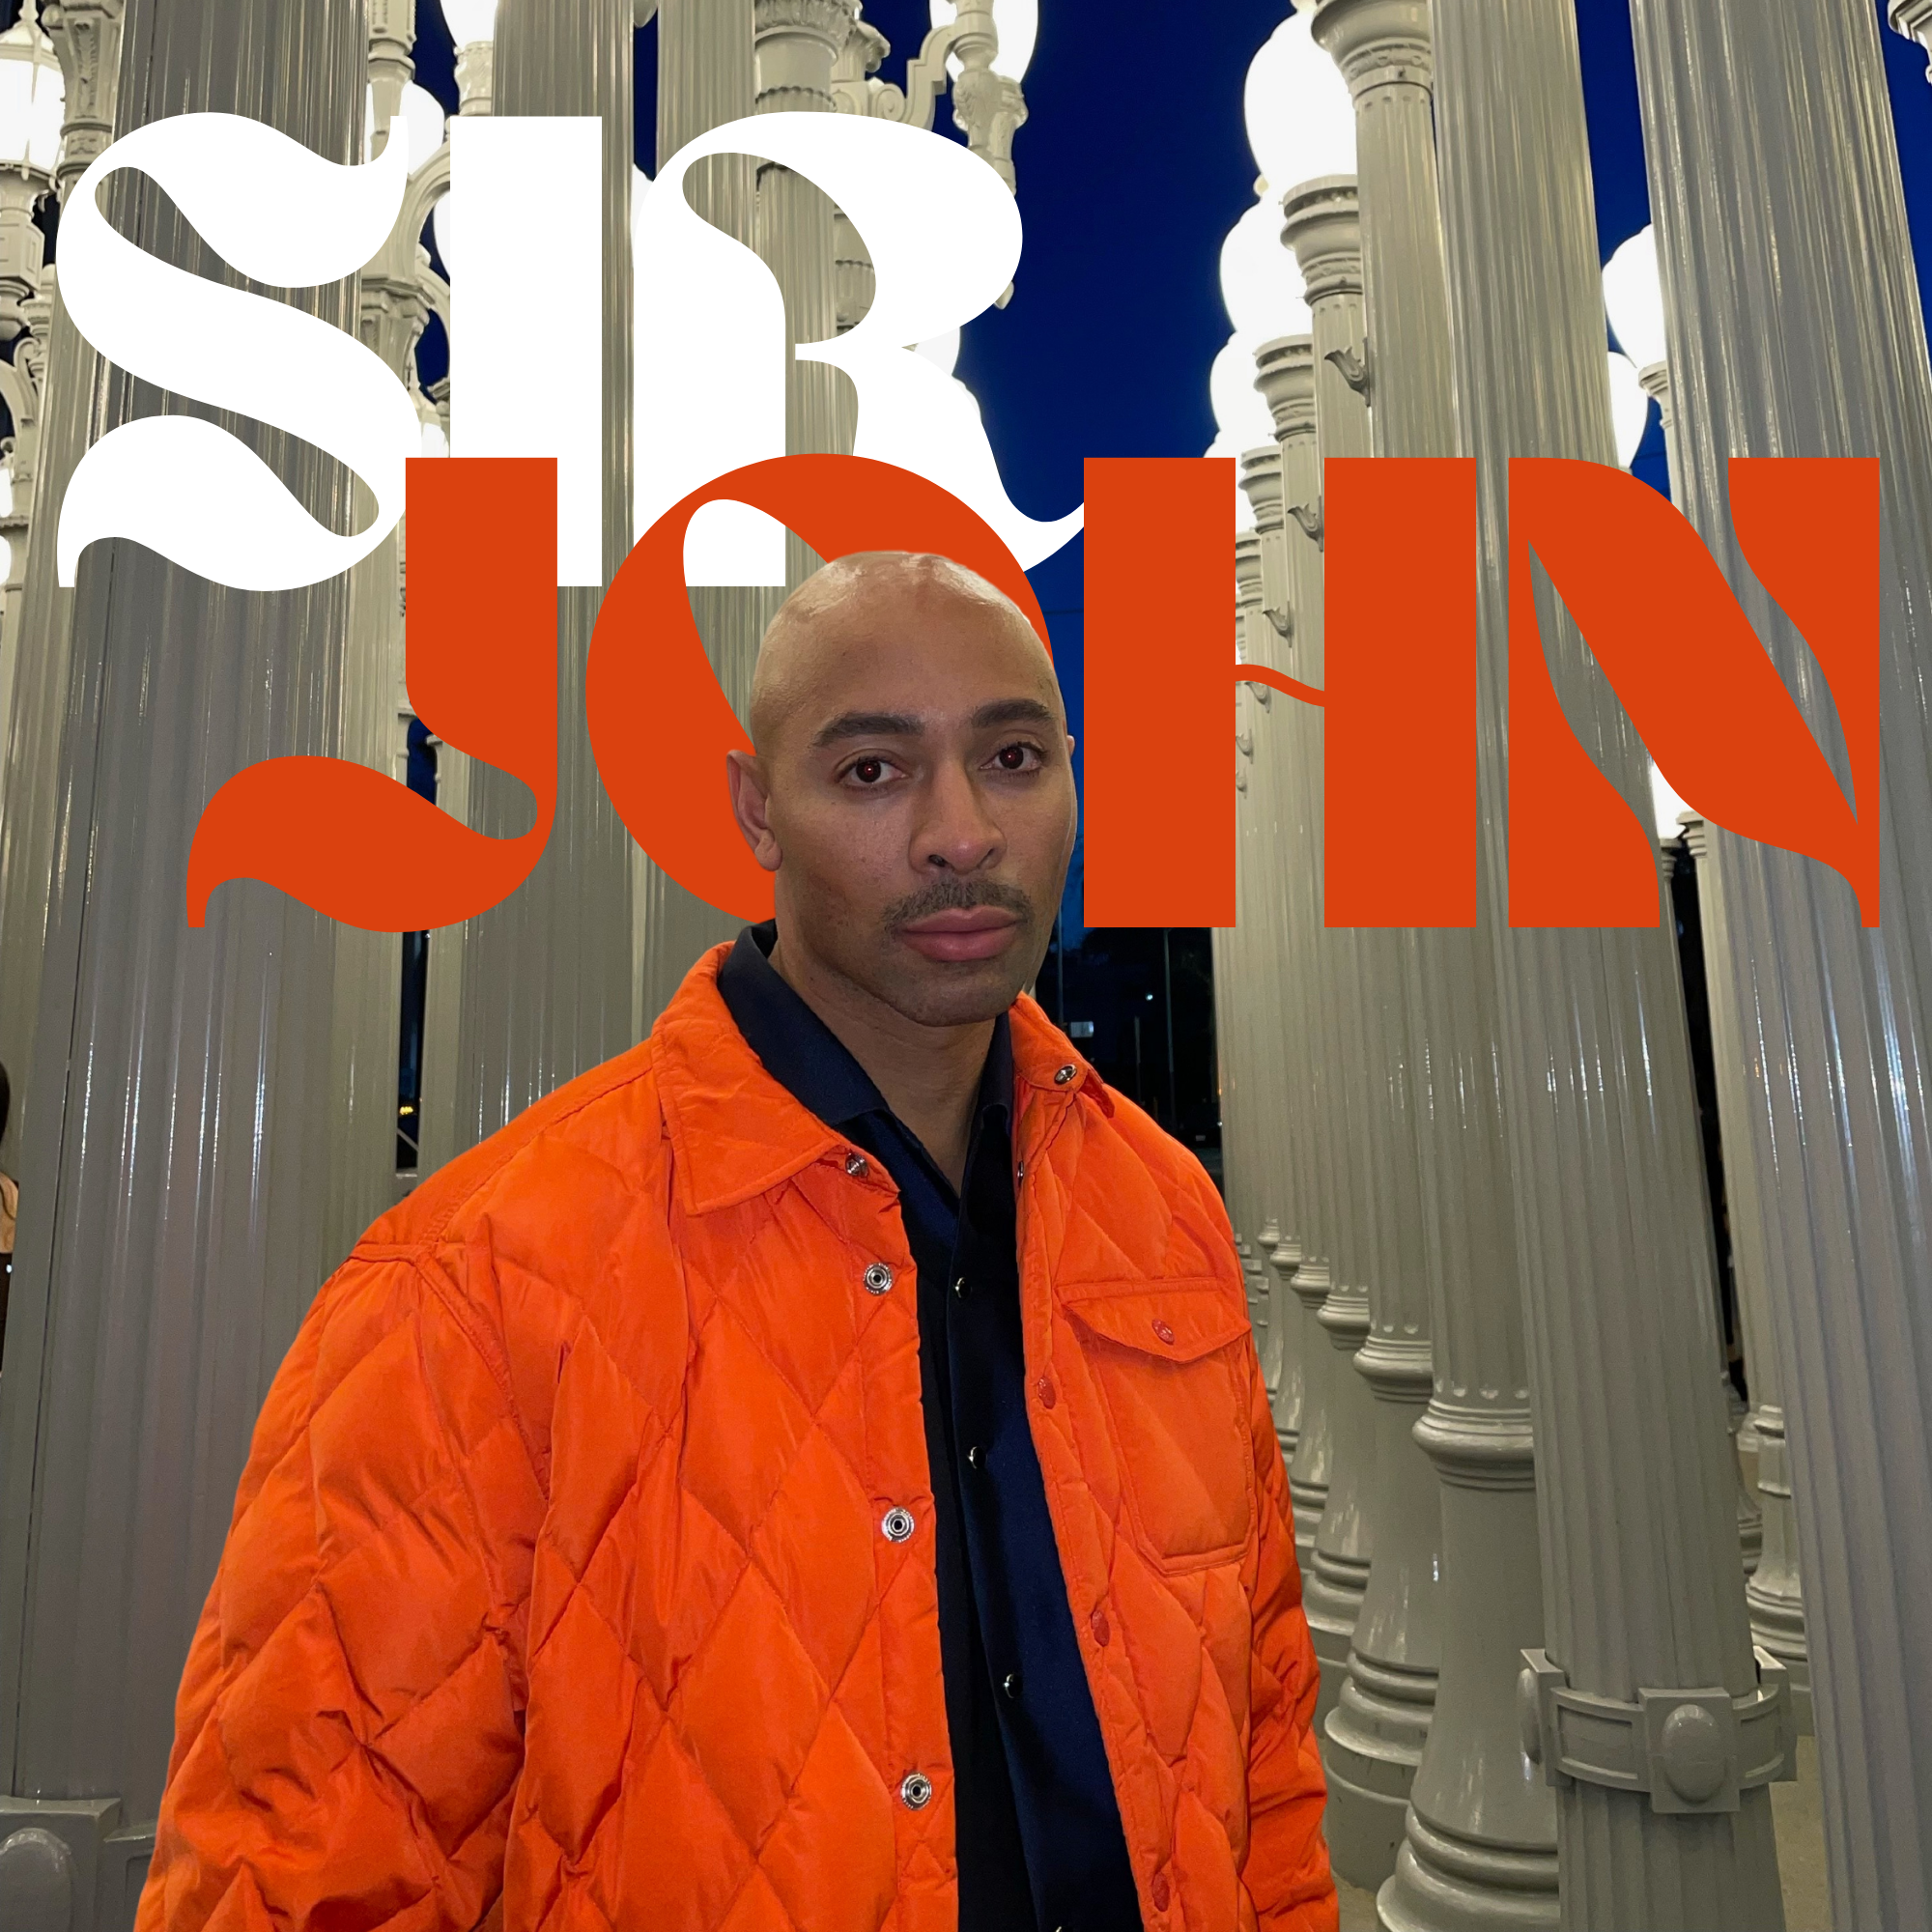 Sir John in an orange quilted jacket in front of columns. The text in the background reads SIR JOHN.